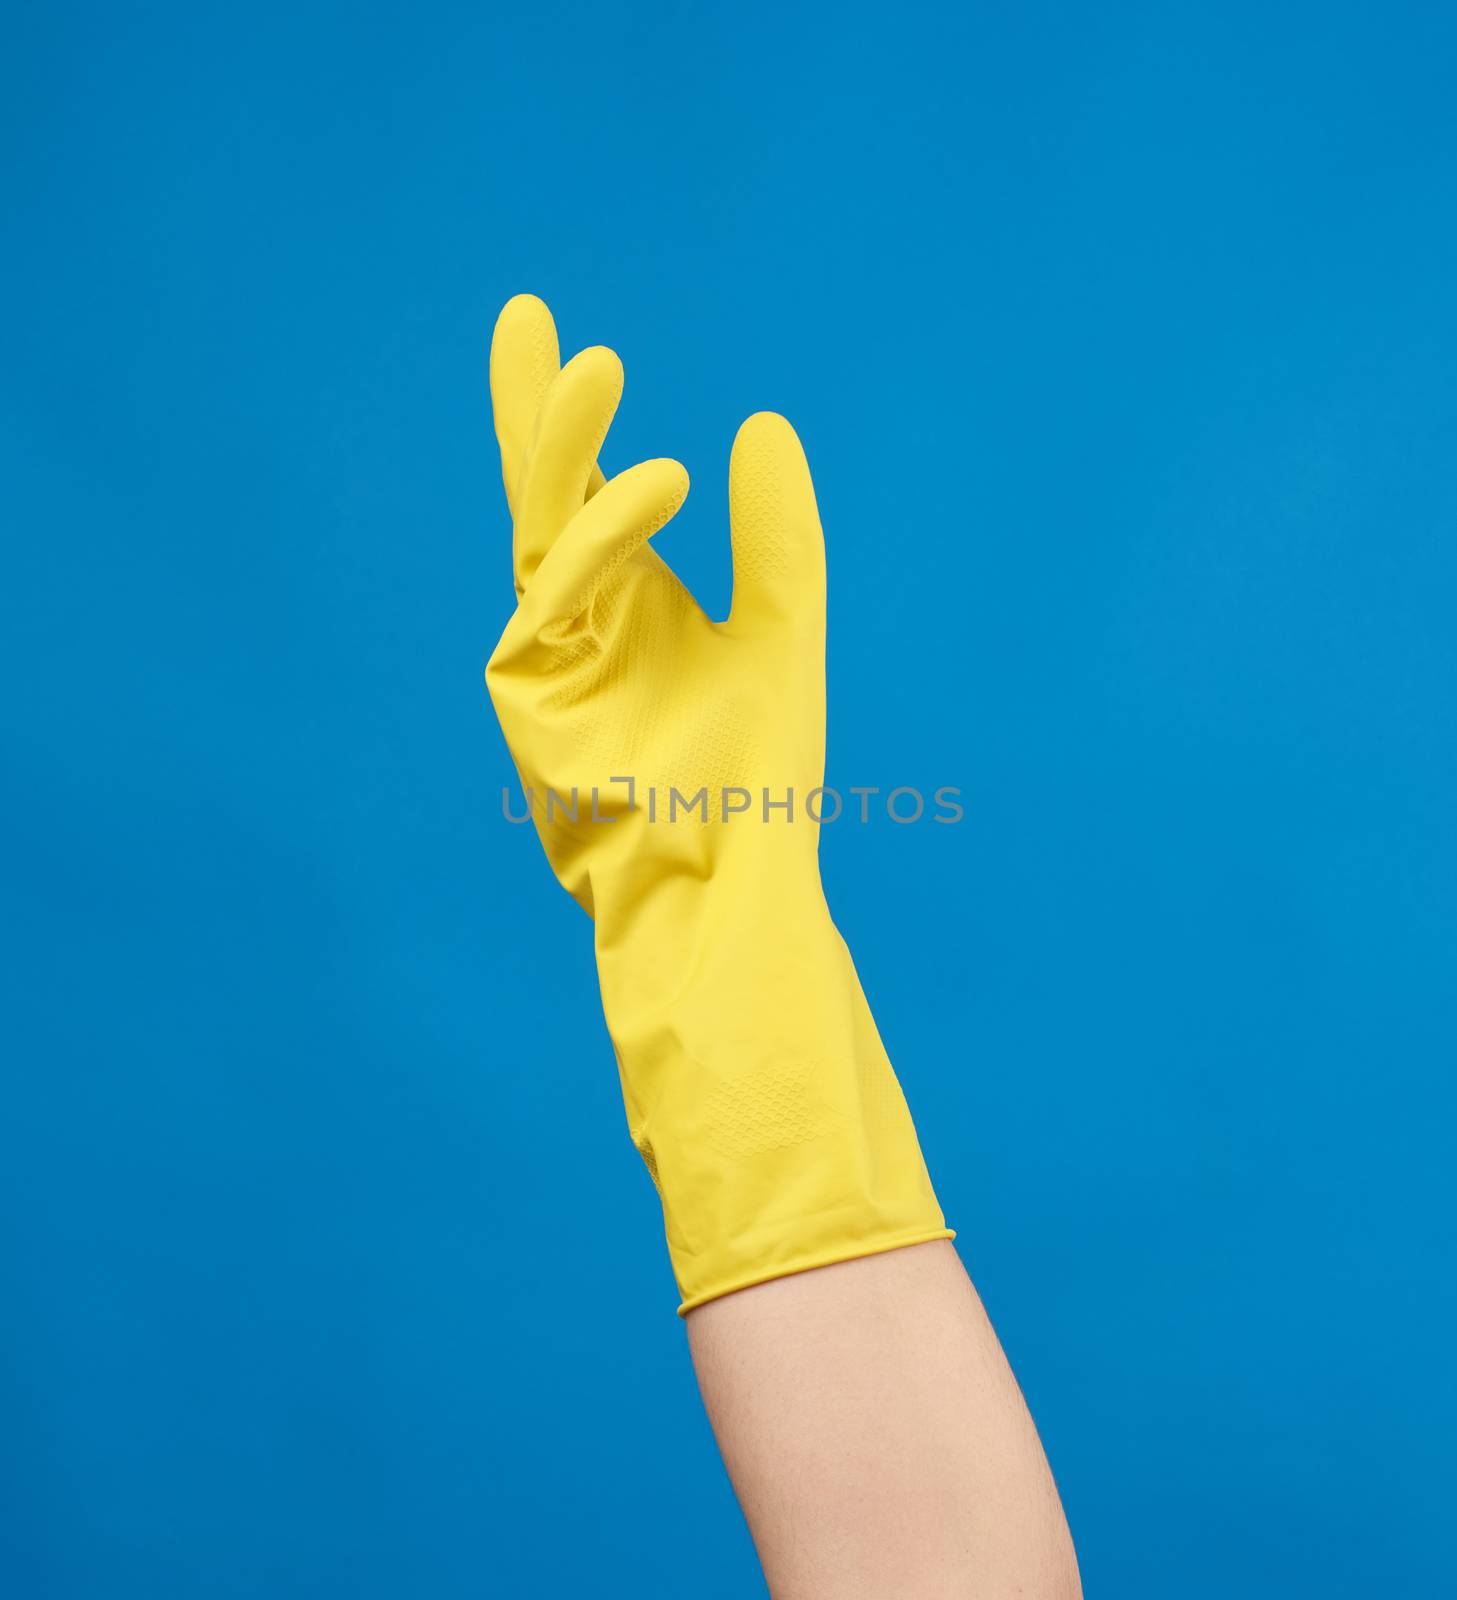 yellow rubber glove for cleaning dressed on a female hand, blue background, part of the body raised up